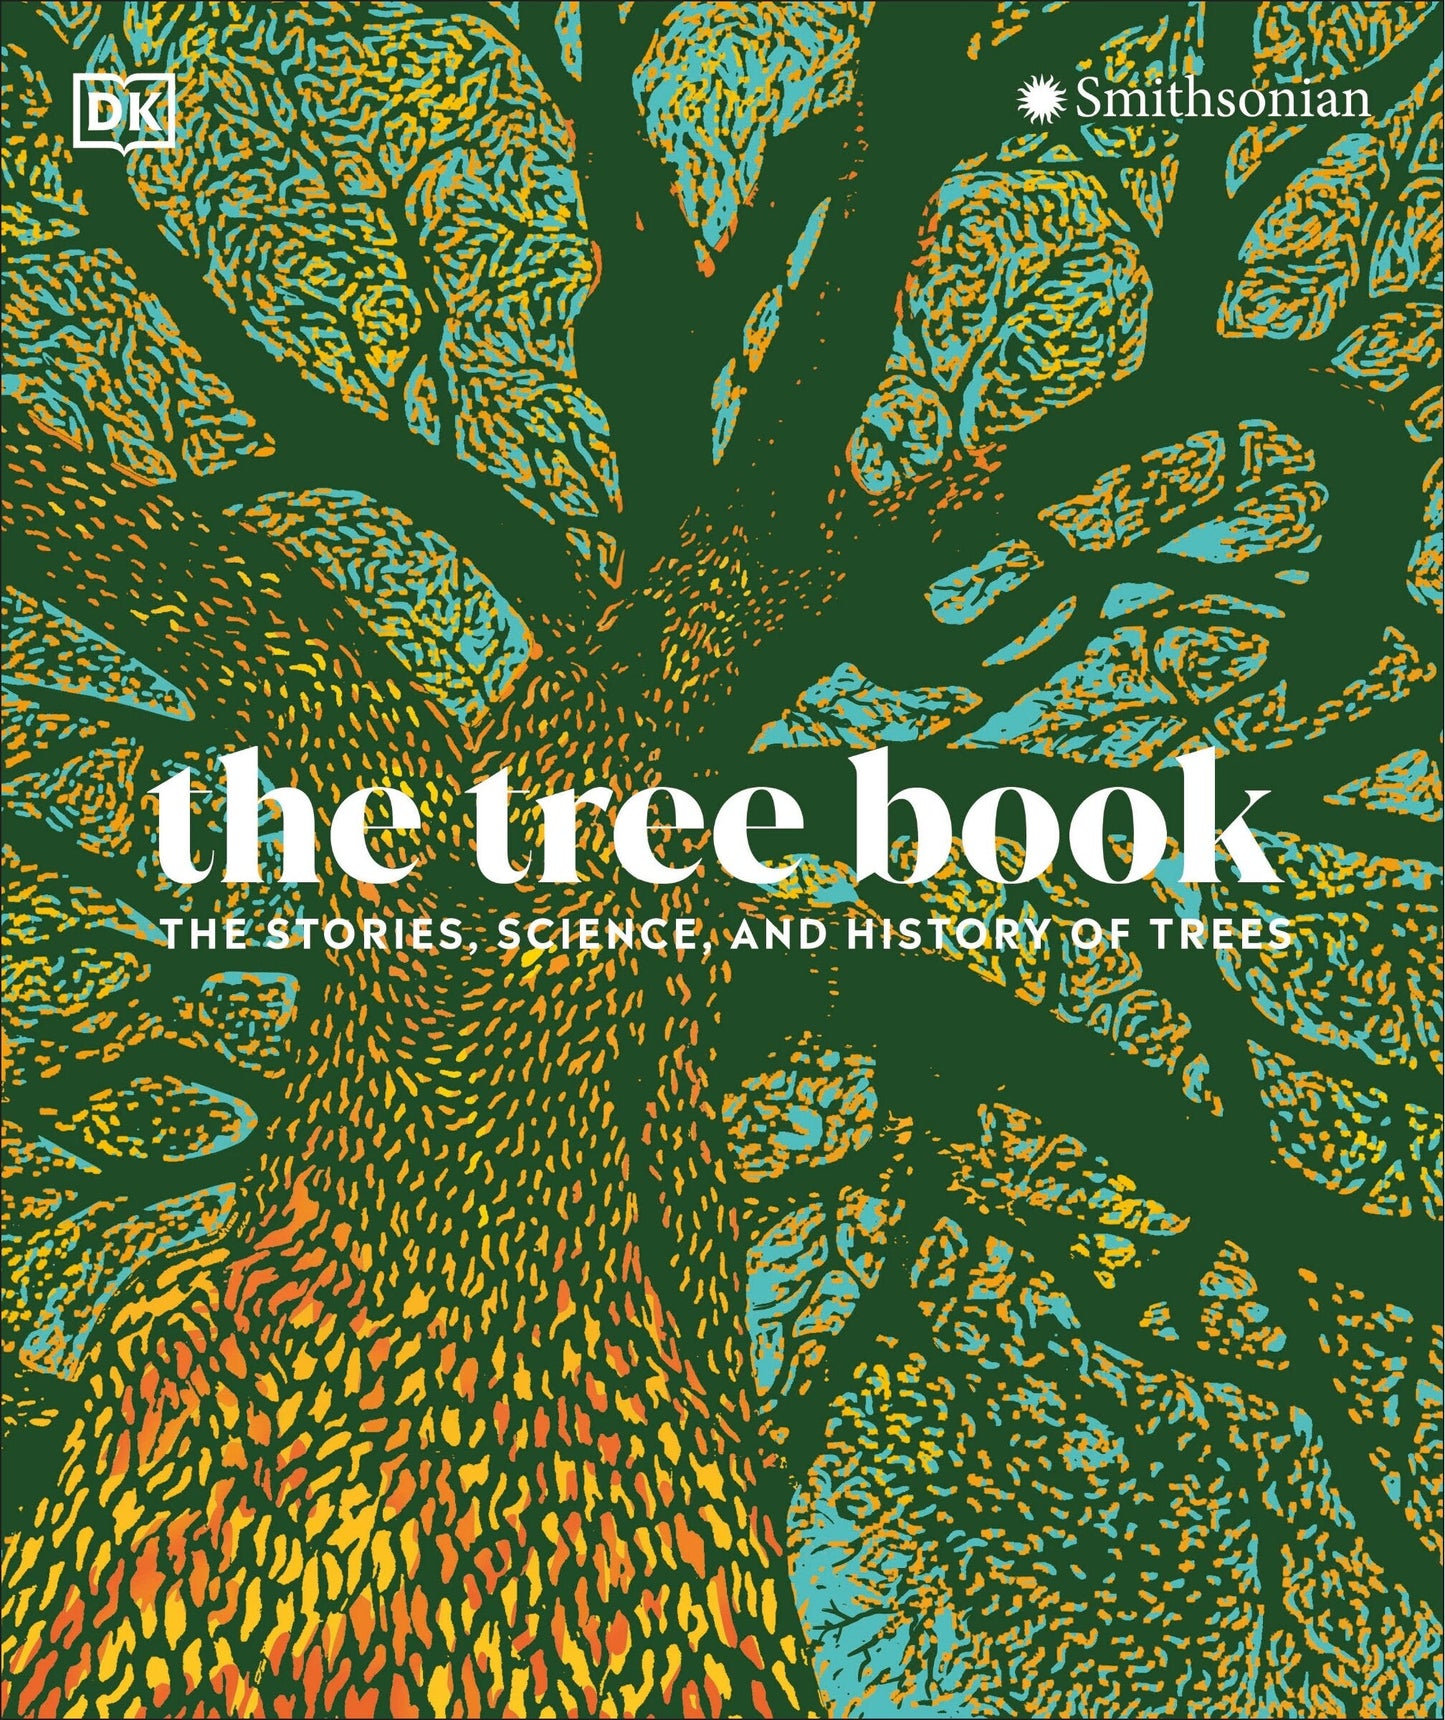 The Tree Book: The Stories, Science, and History of Trees - Dk (Hardcover)-Nature-9780744027464-BookBizCanada